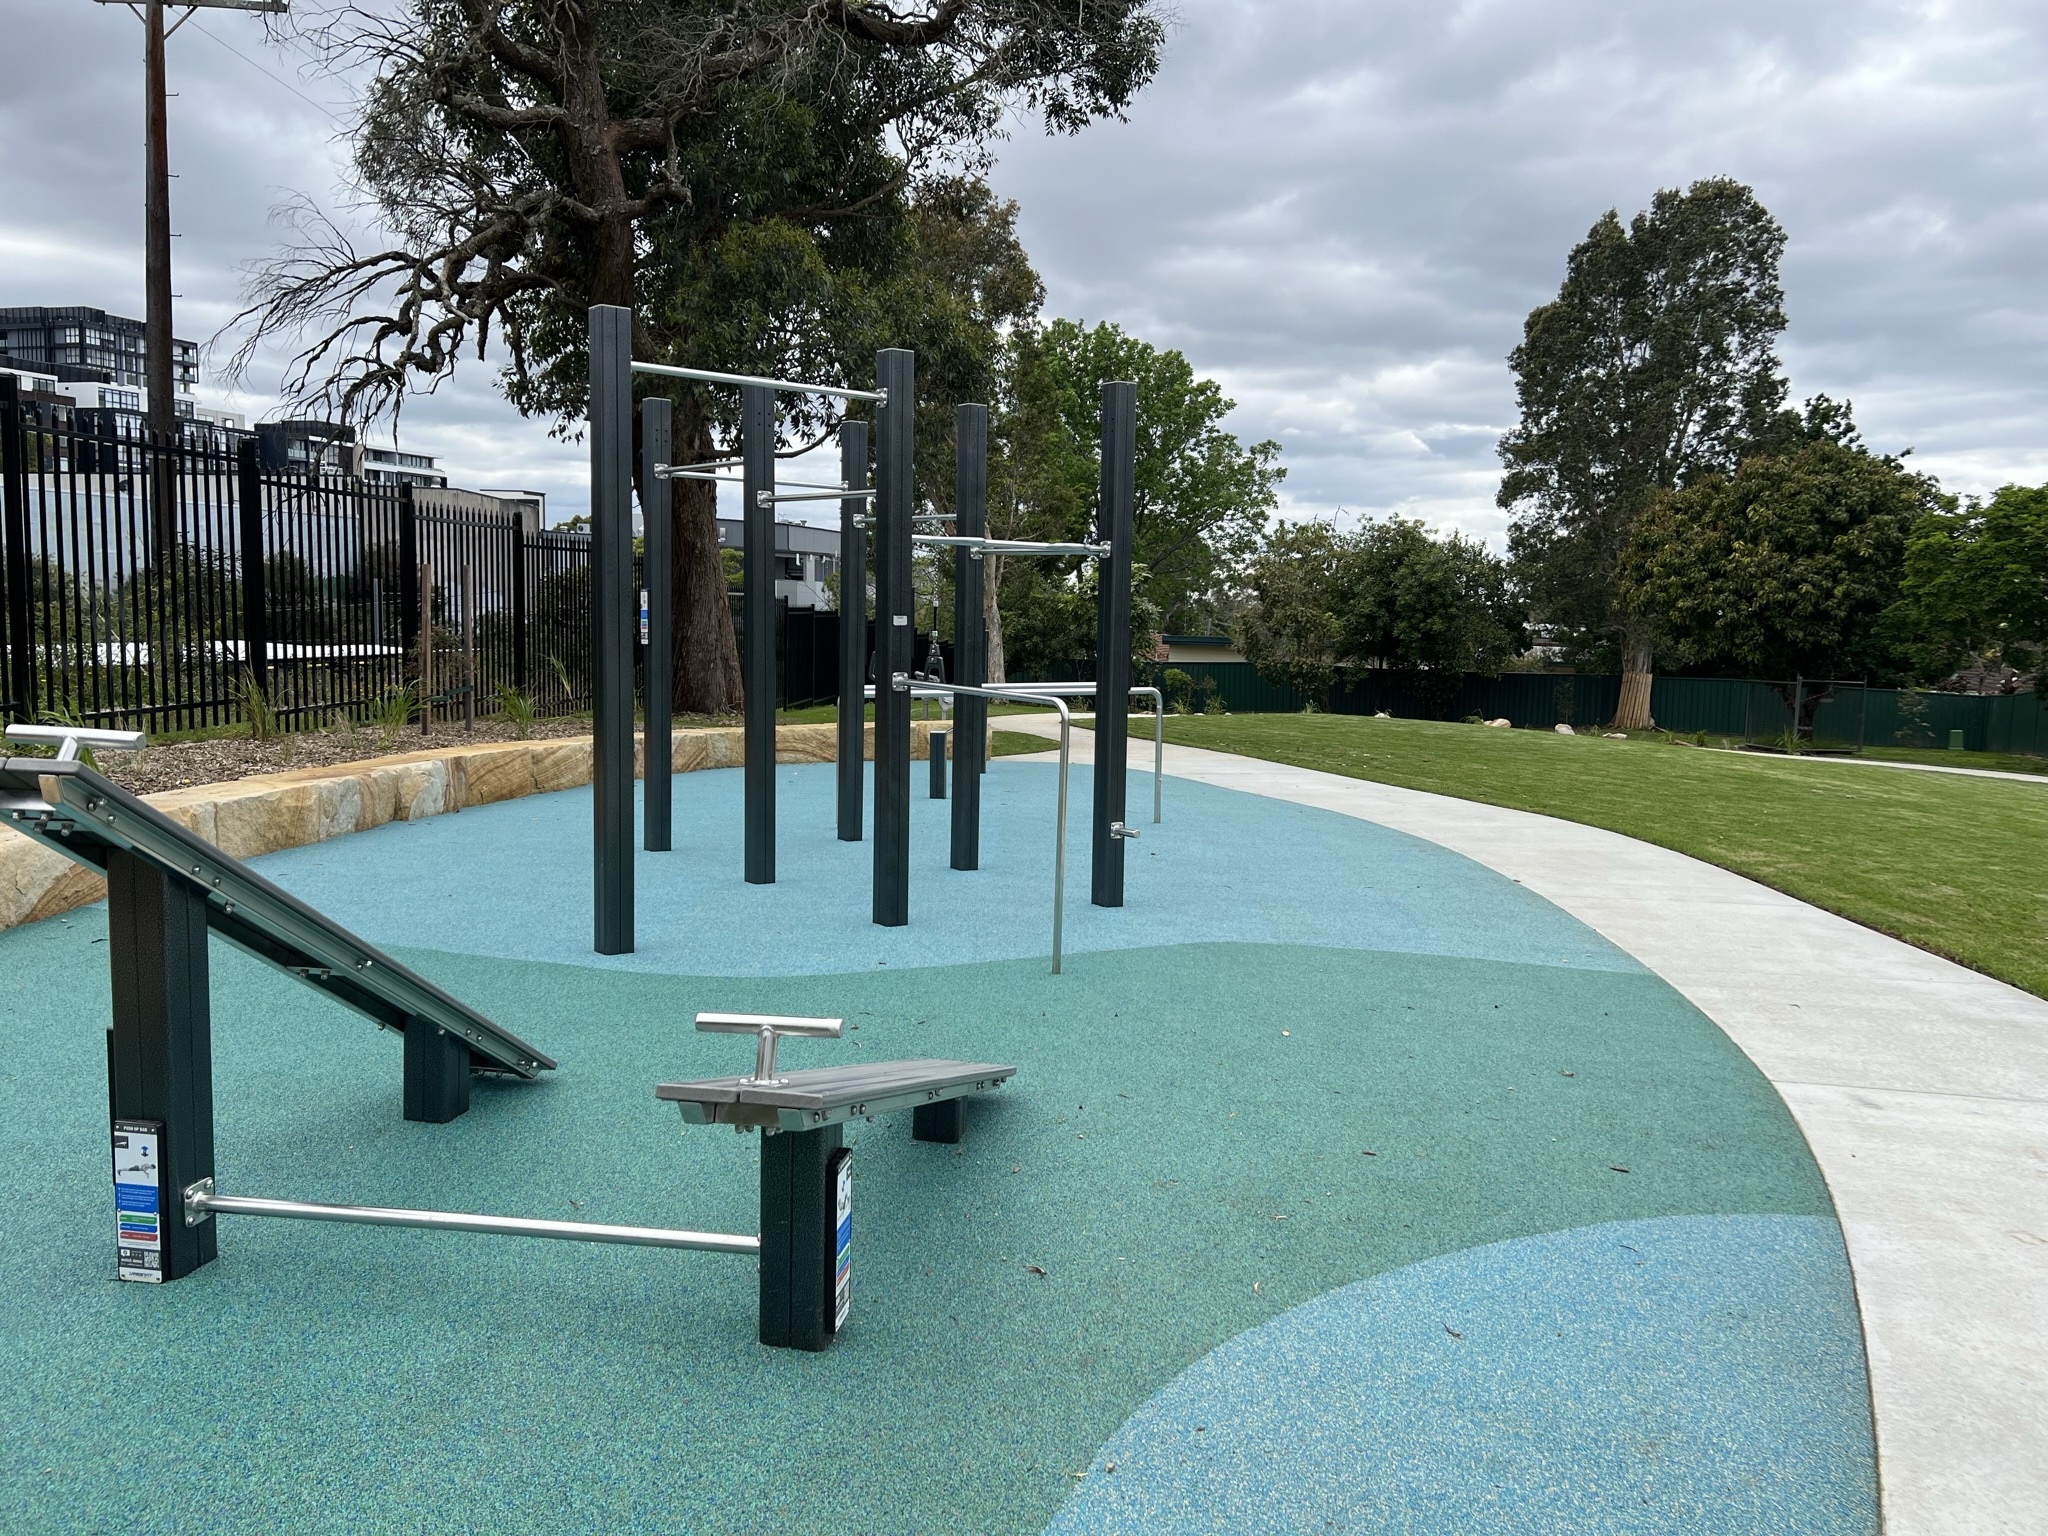 Park with outdoor fitness equipment